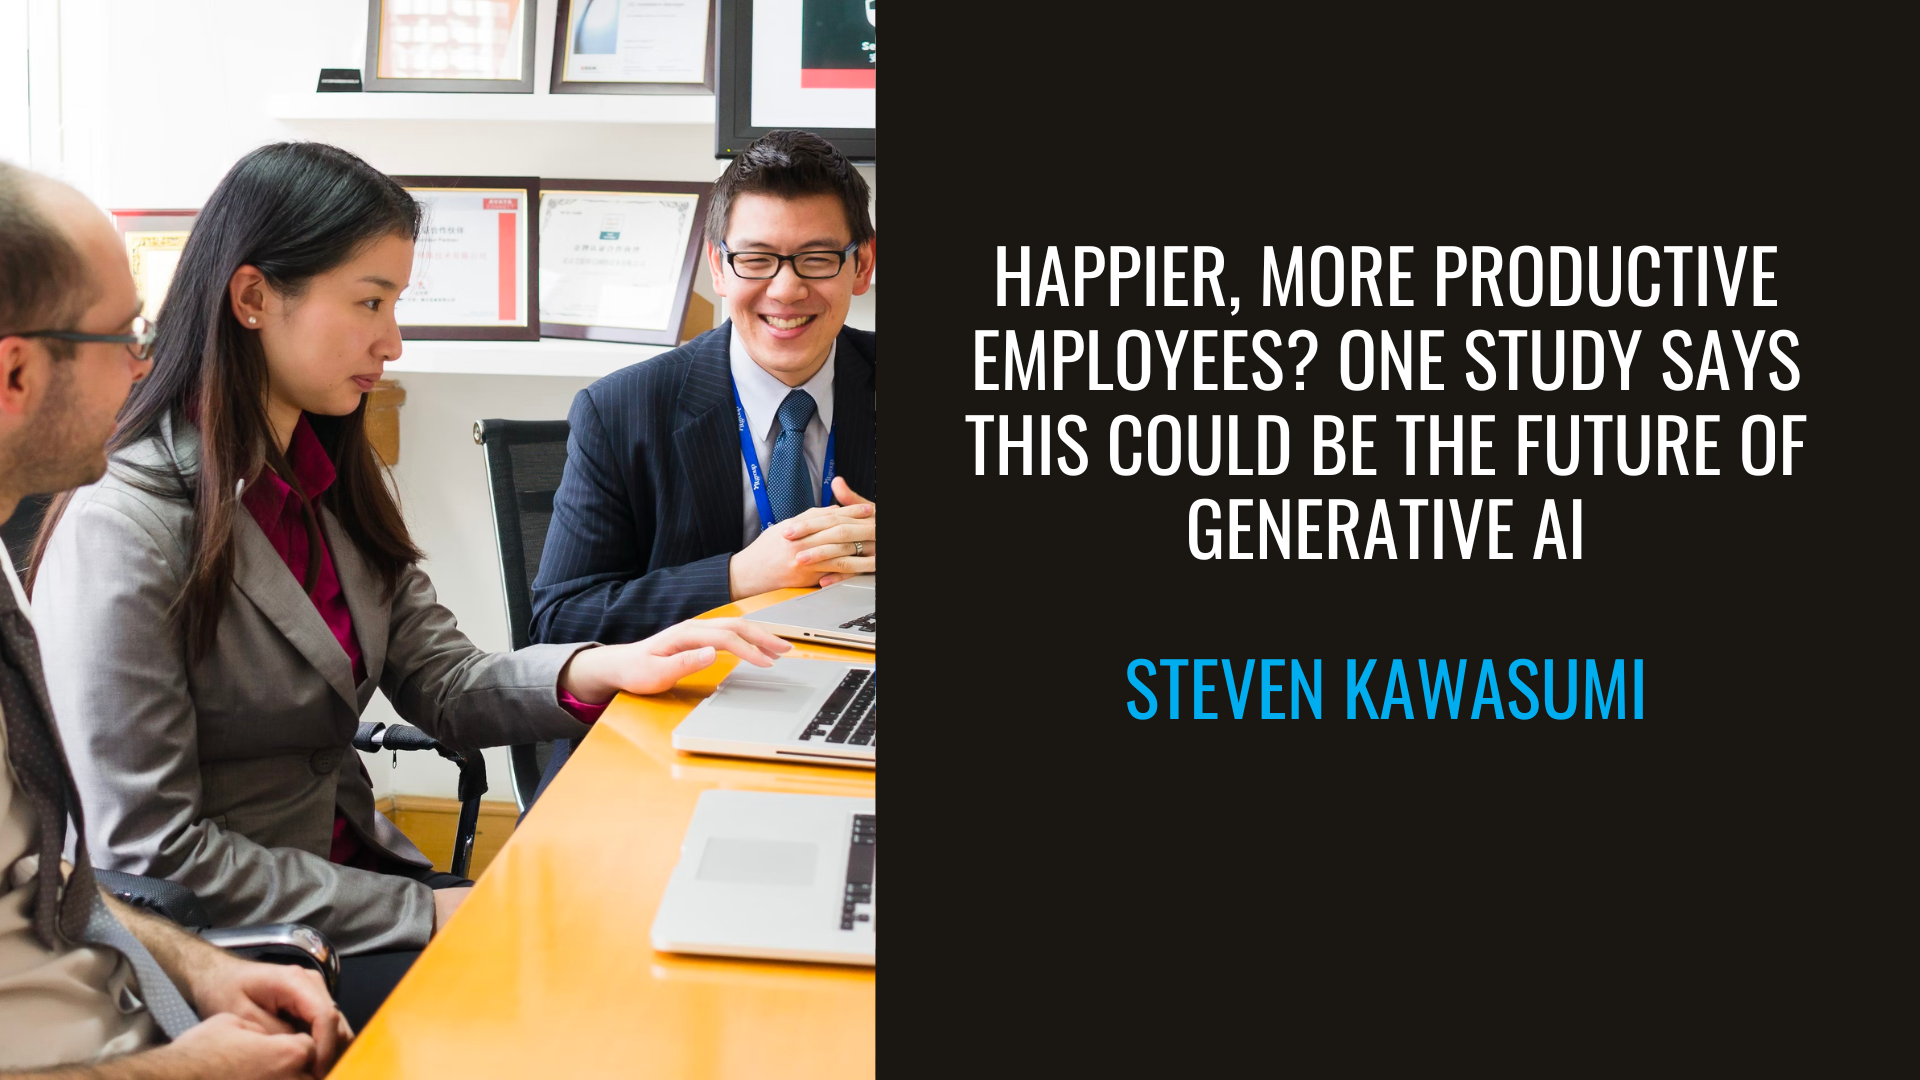 Happier, More Productive Employees? One Study Says This Could Be the Future of Generative AI